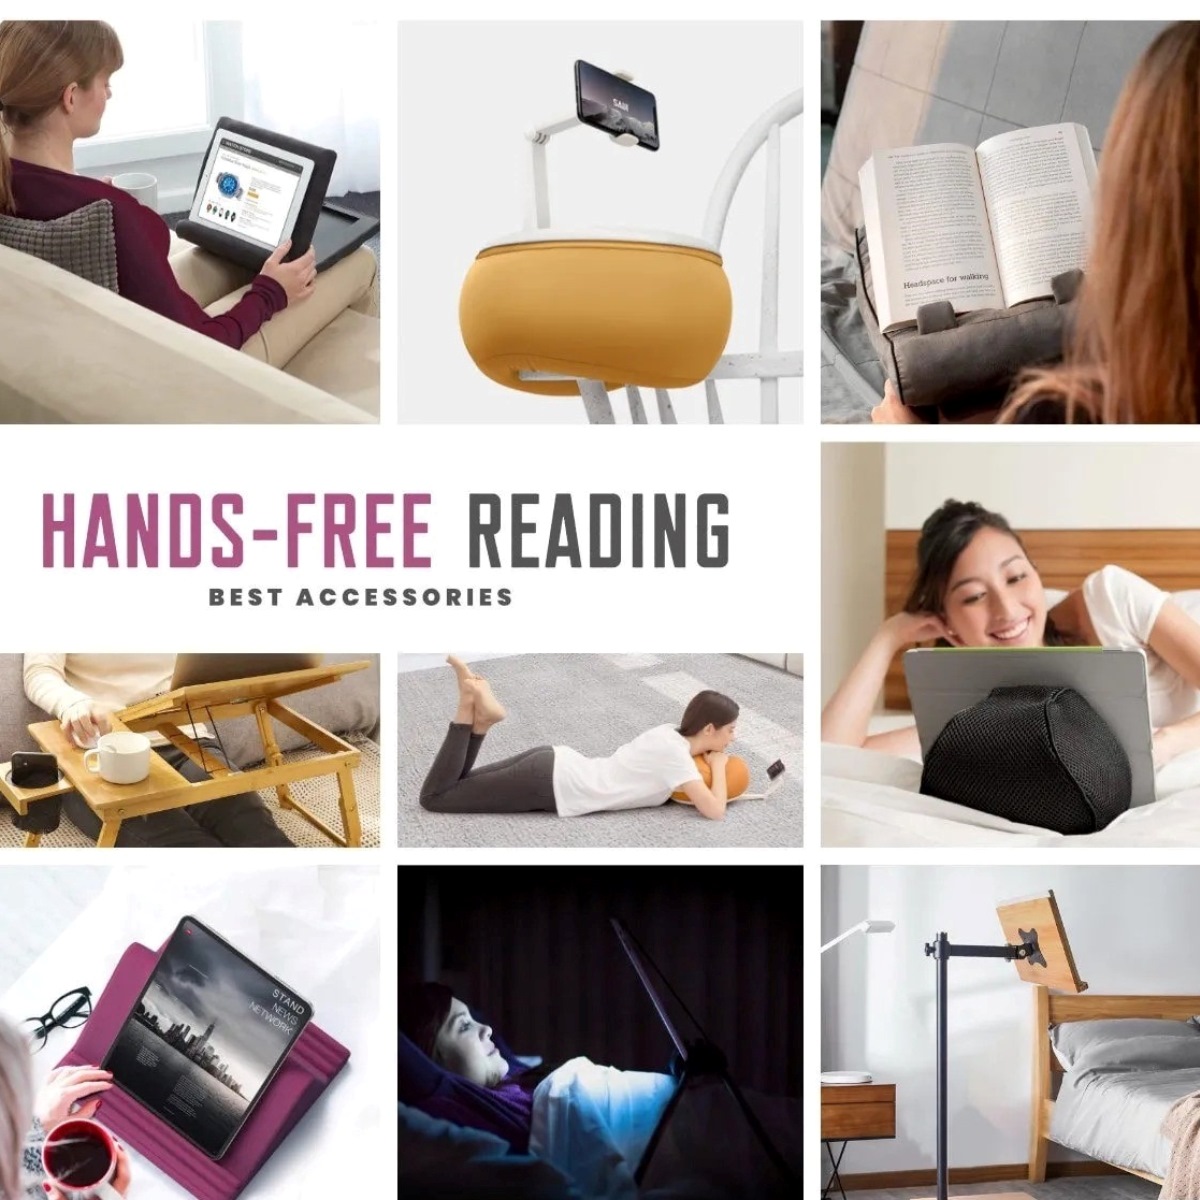 14 Amazing Kindle Holders For Reading In Bed for 2023